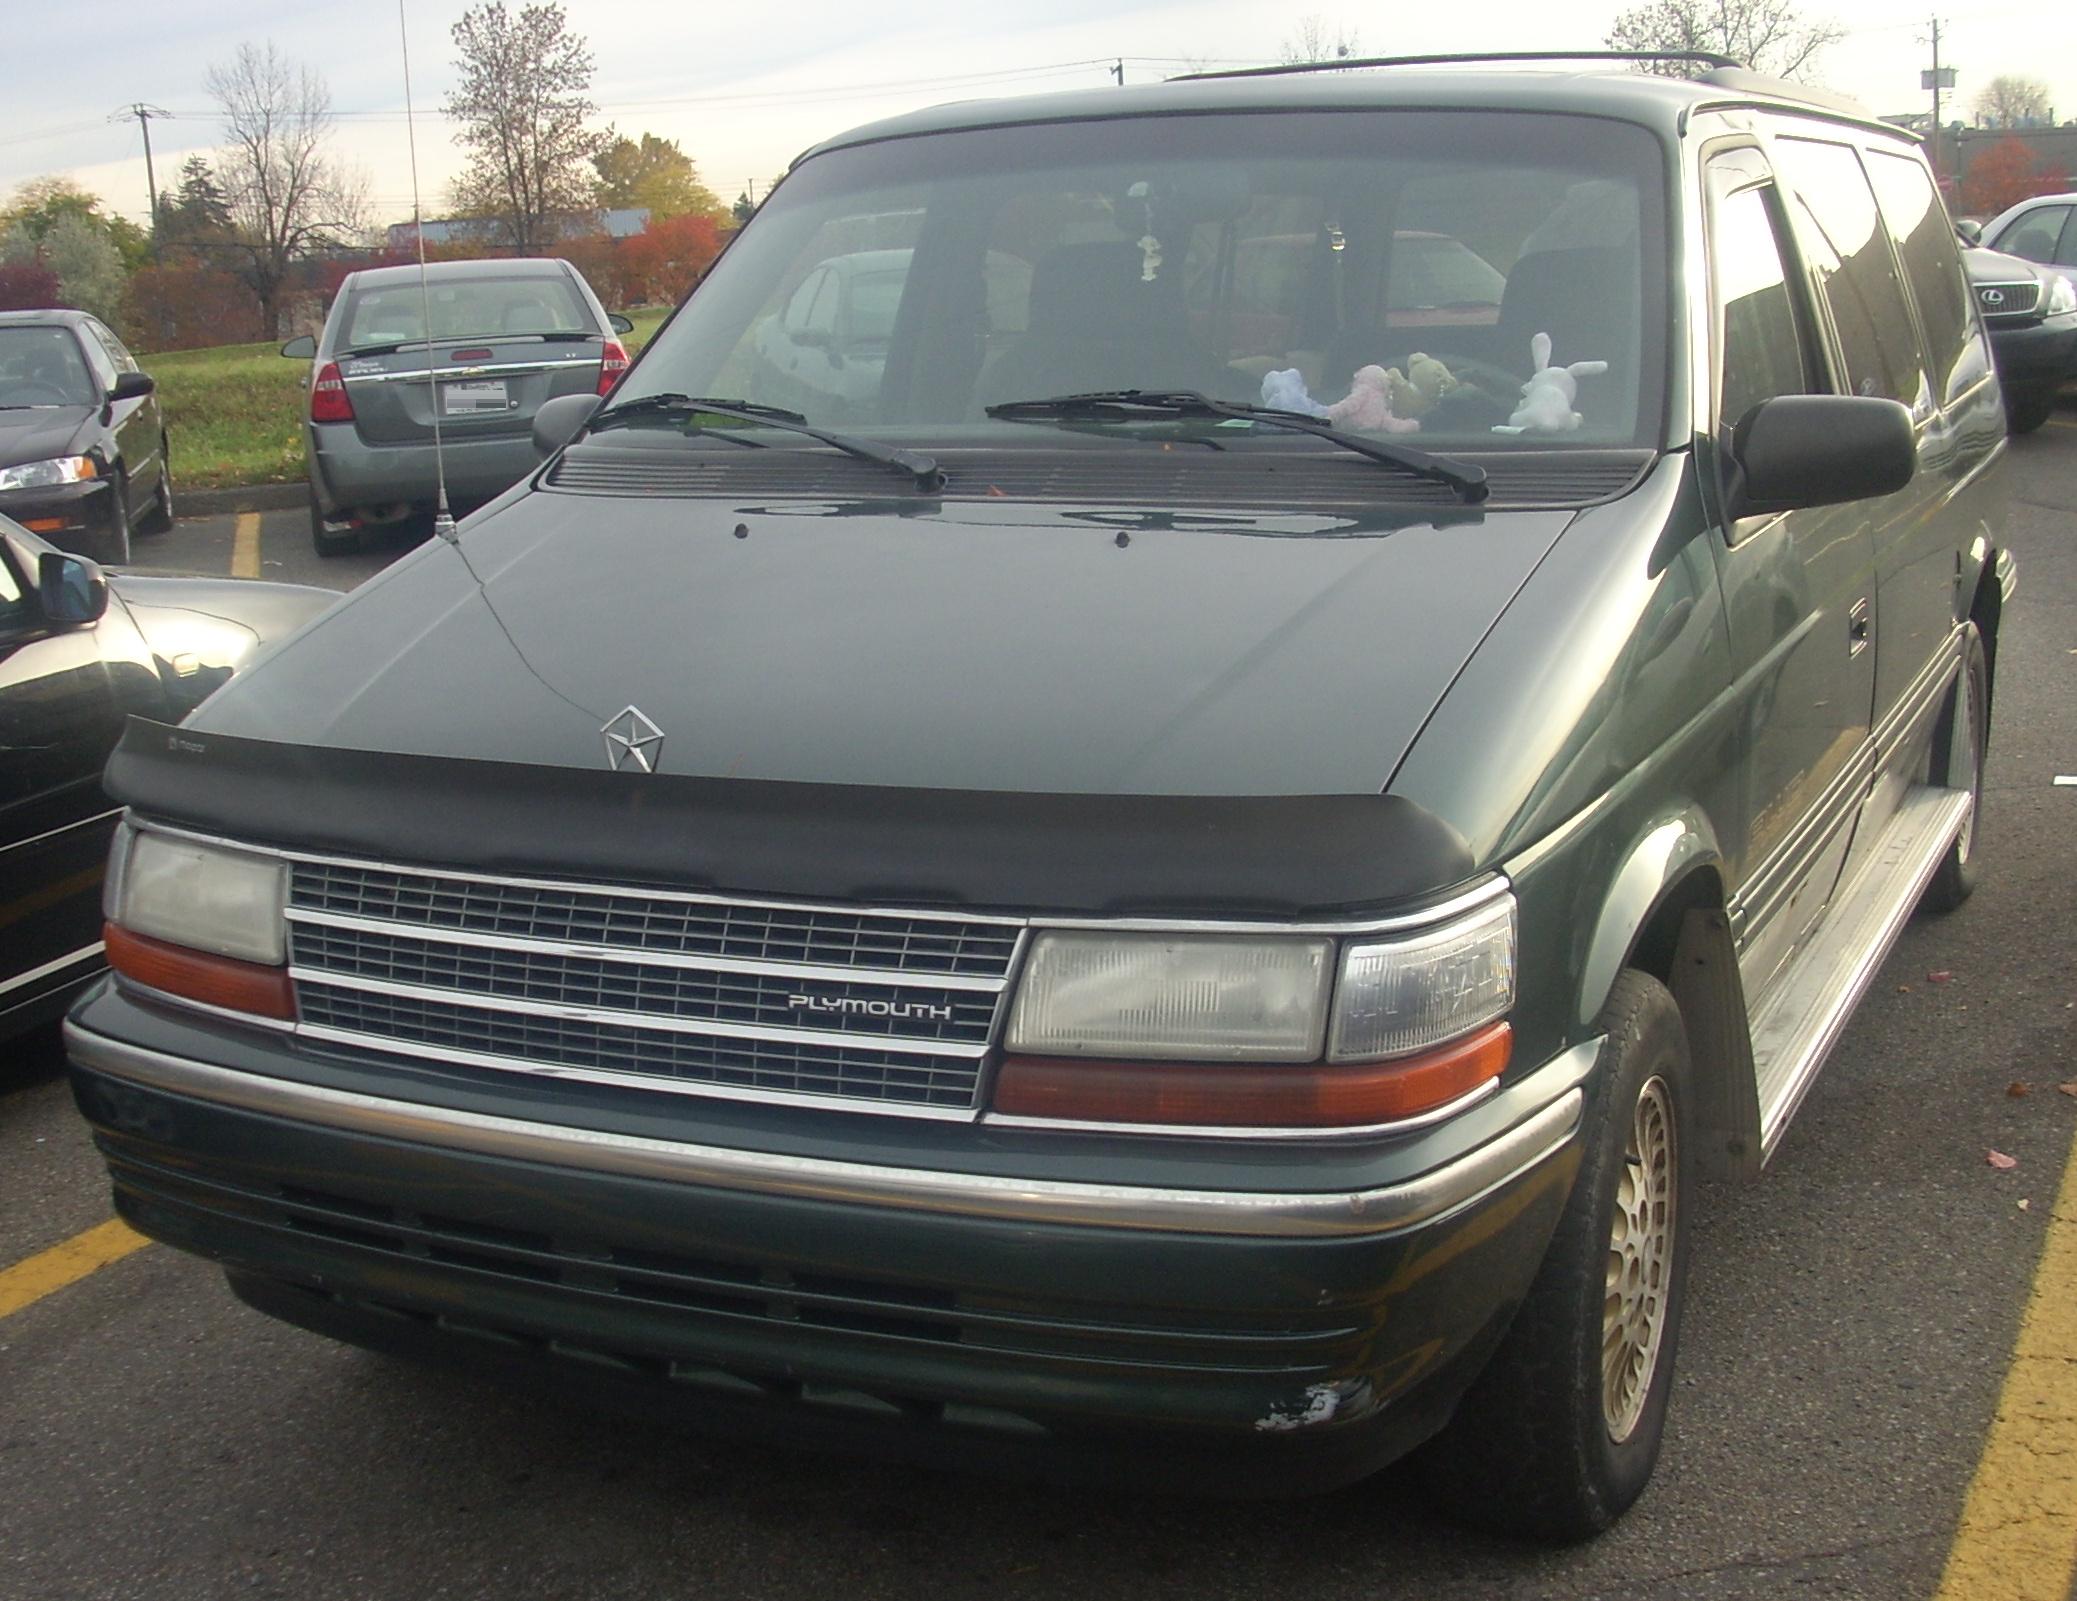 File:'92-'93 Plymouth Grand Voyager.JPG - Wikimedia Commons